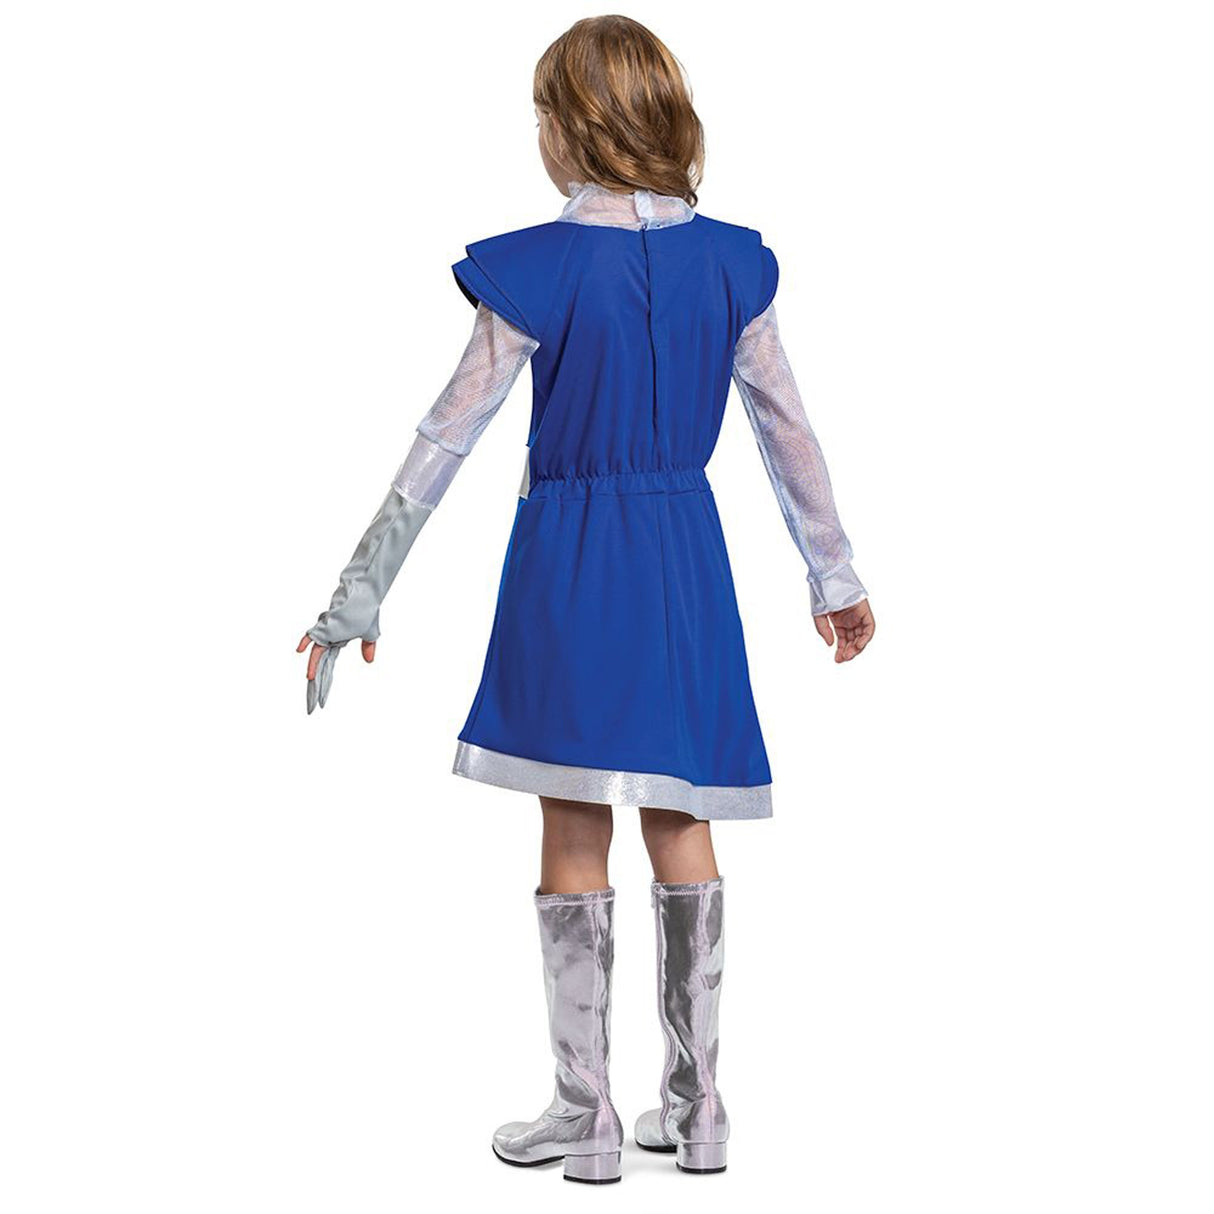 DISGUISE (TOY-SPORT) Costumes Zombie 3 Addison Alien Classic Costume for Kids